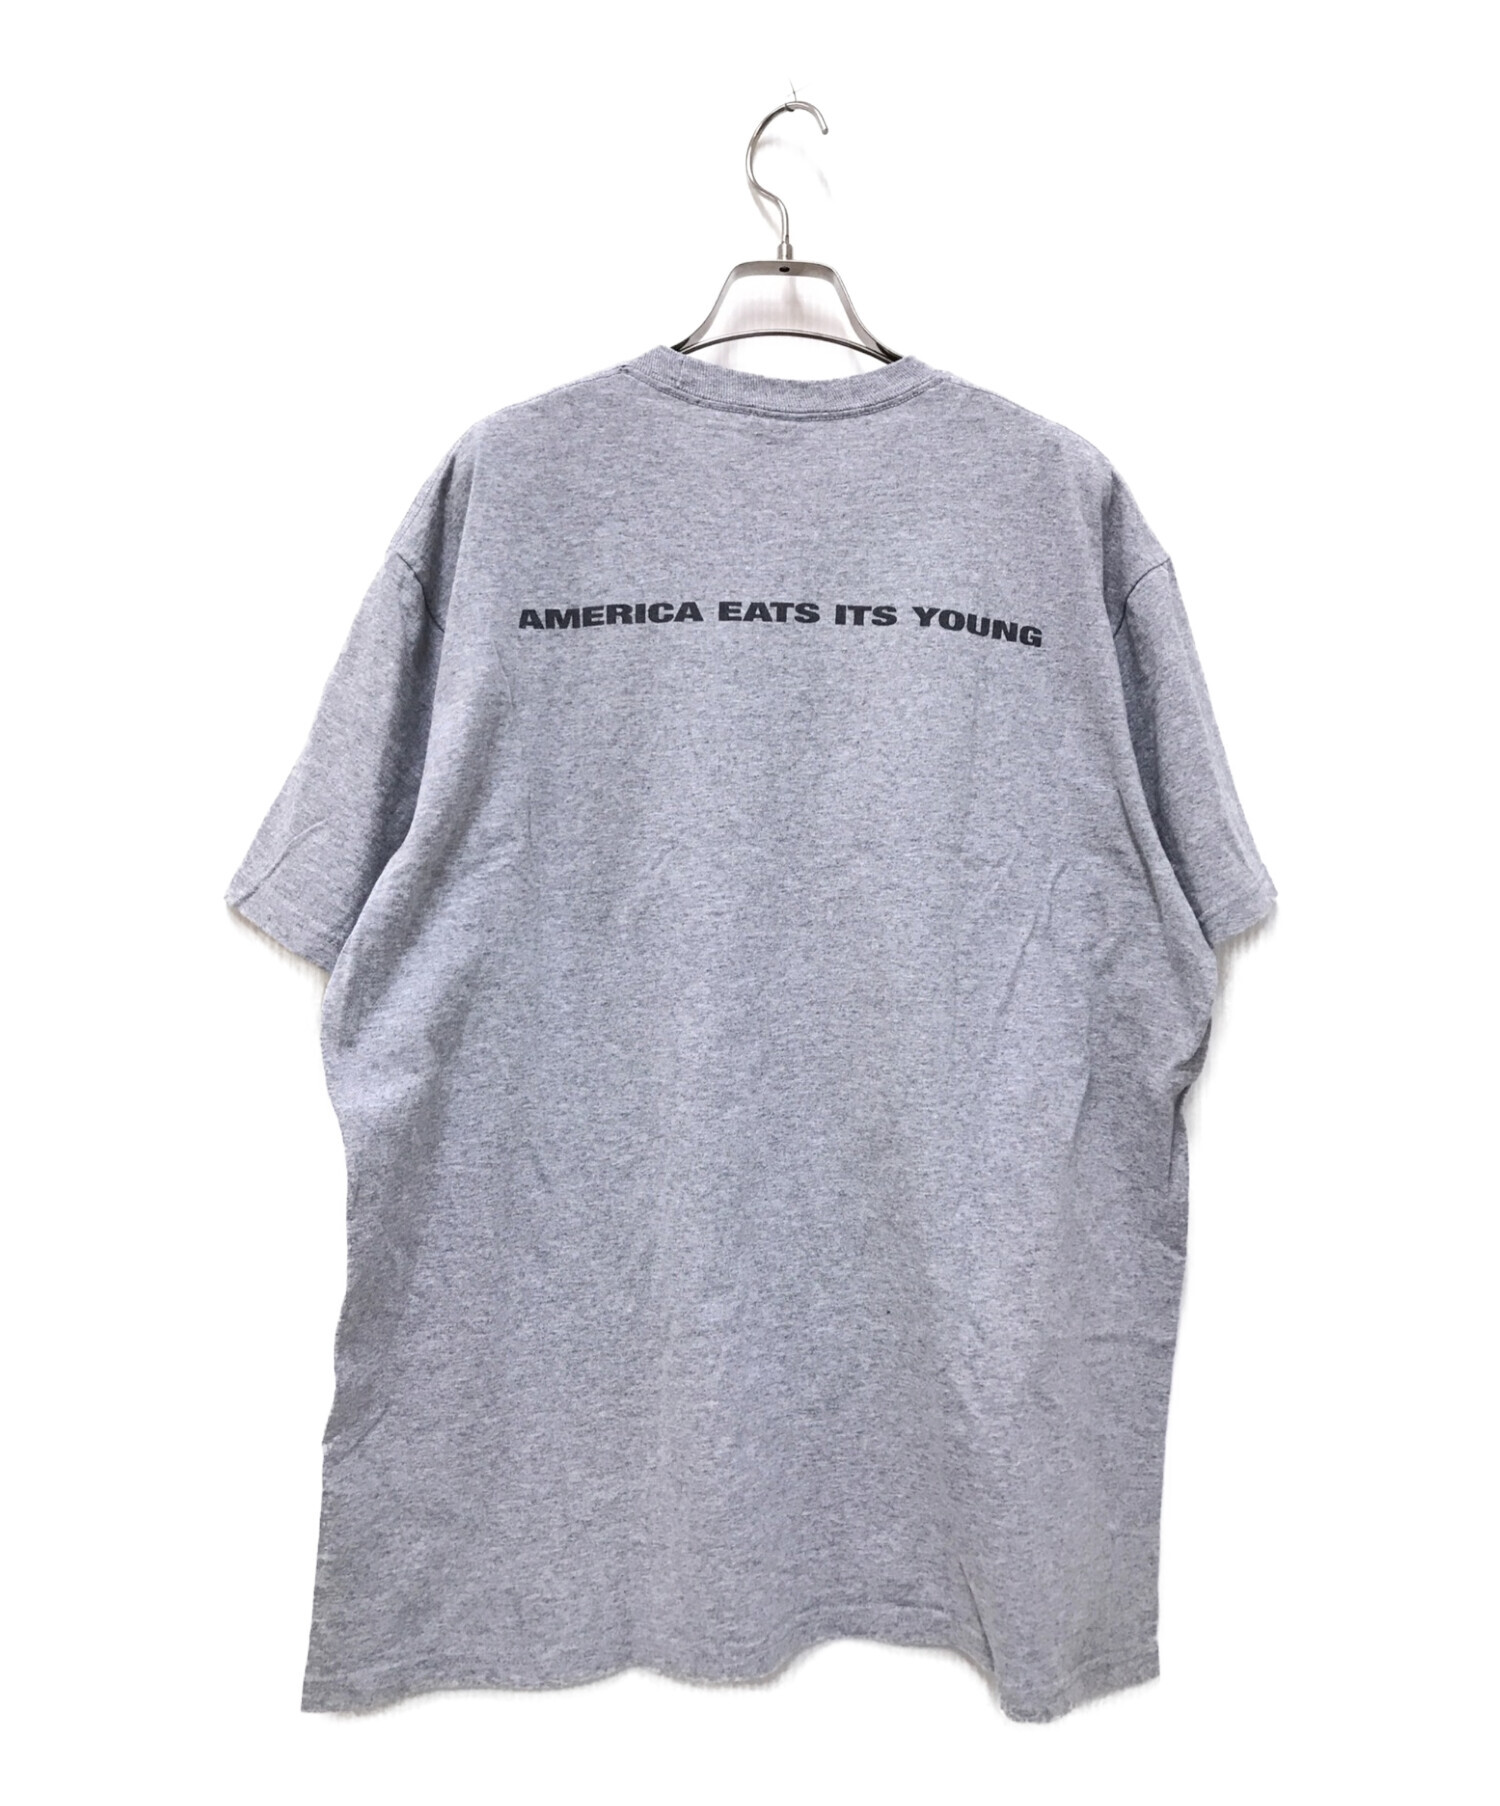 Supreme America Eats Its Young Tee Lサイズ - Tシャツ/カットソー